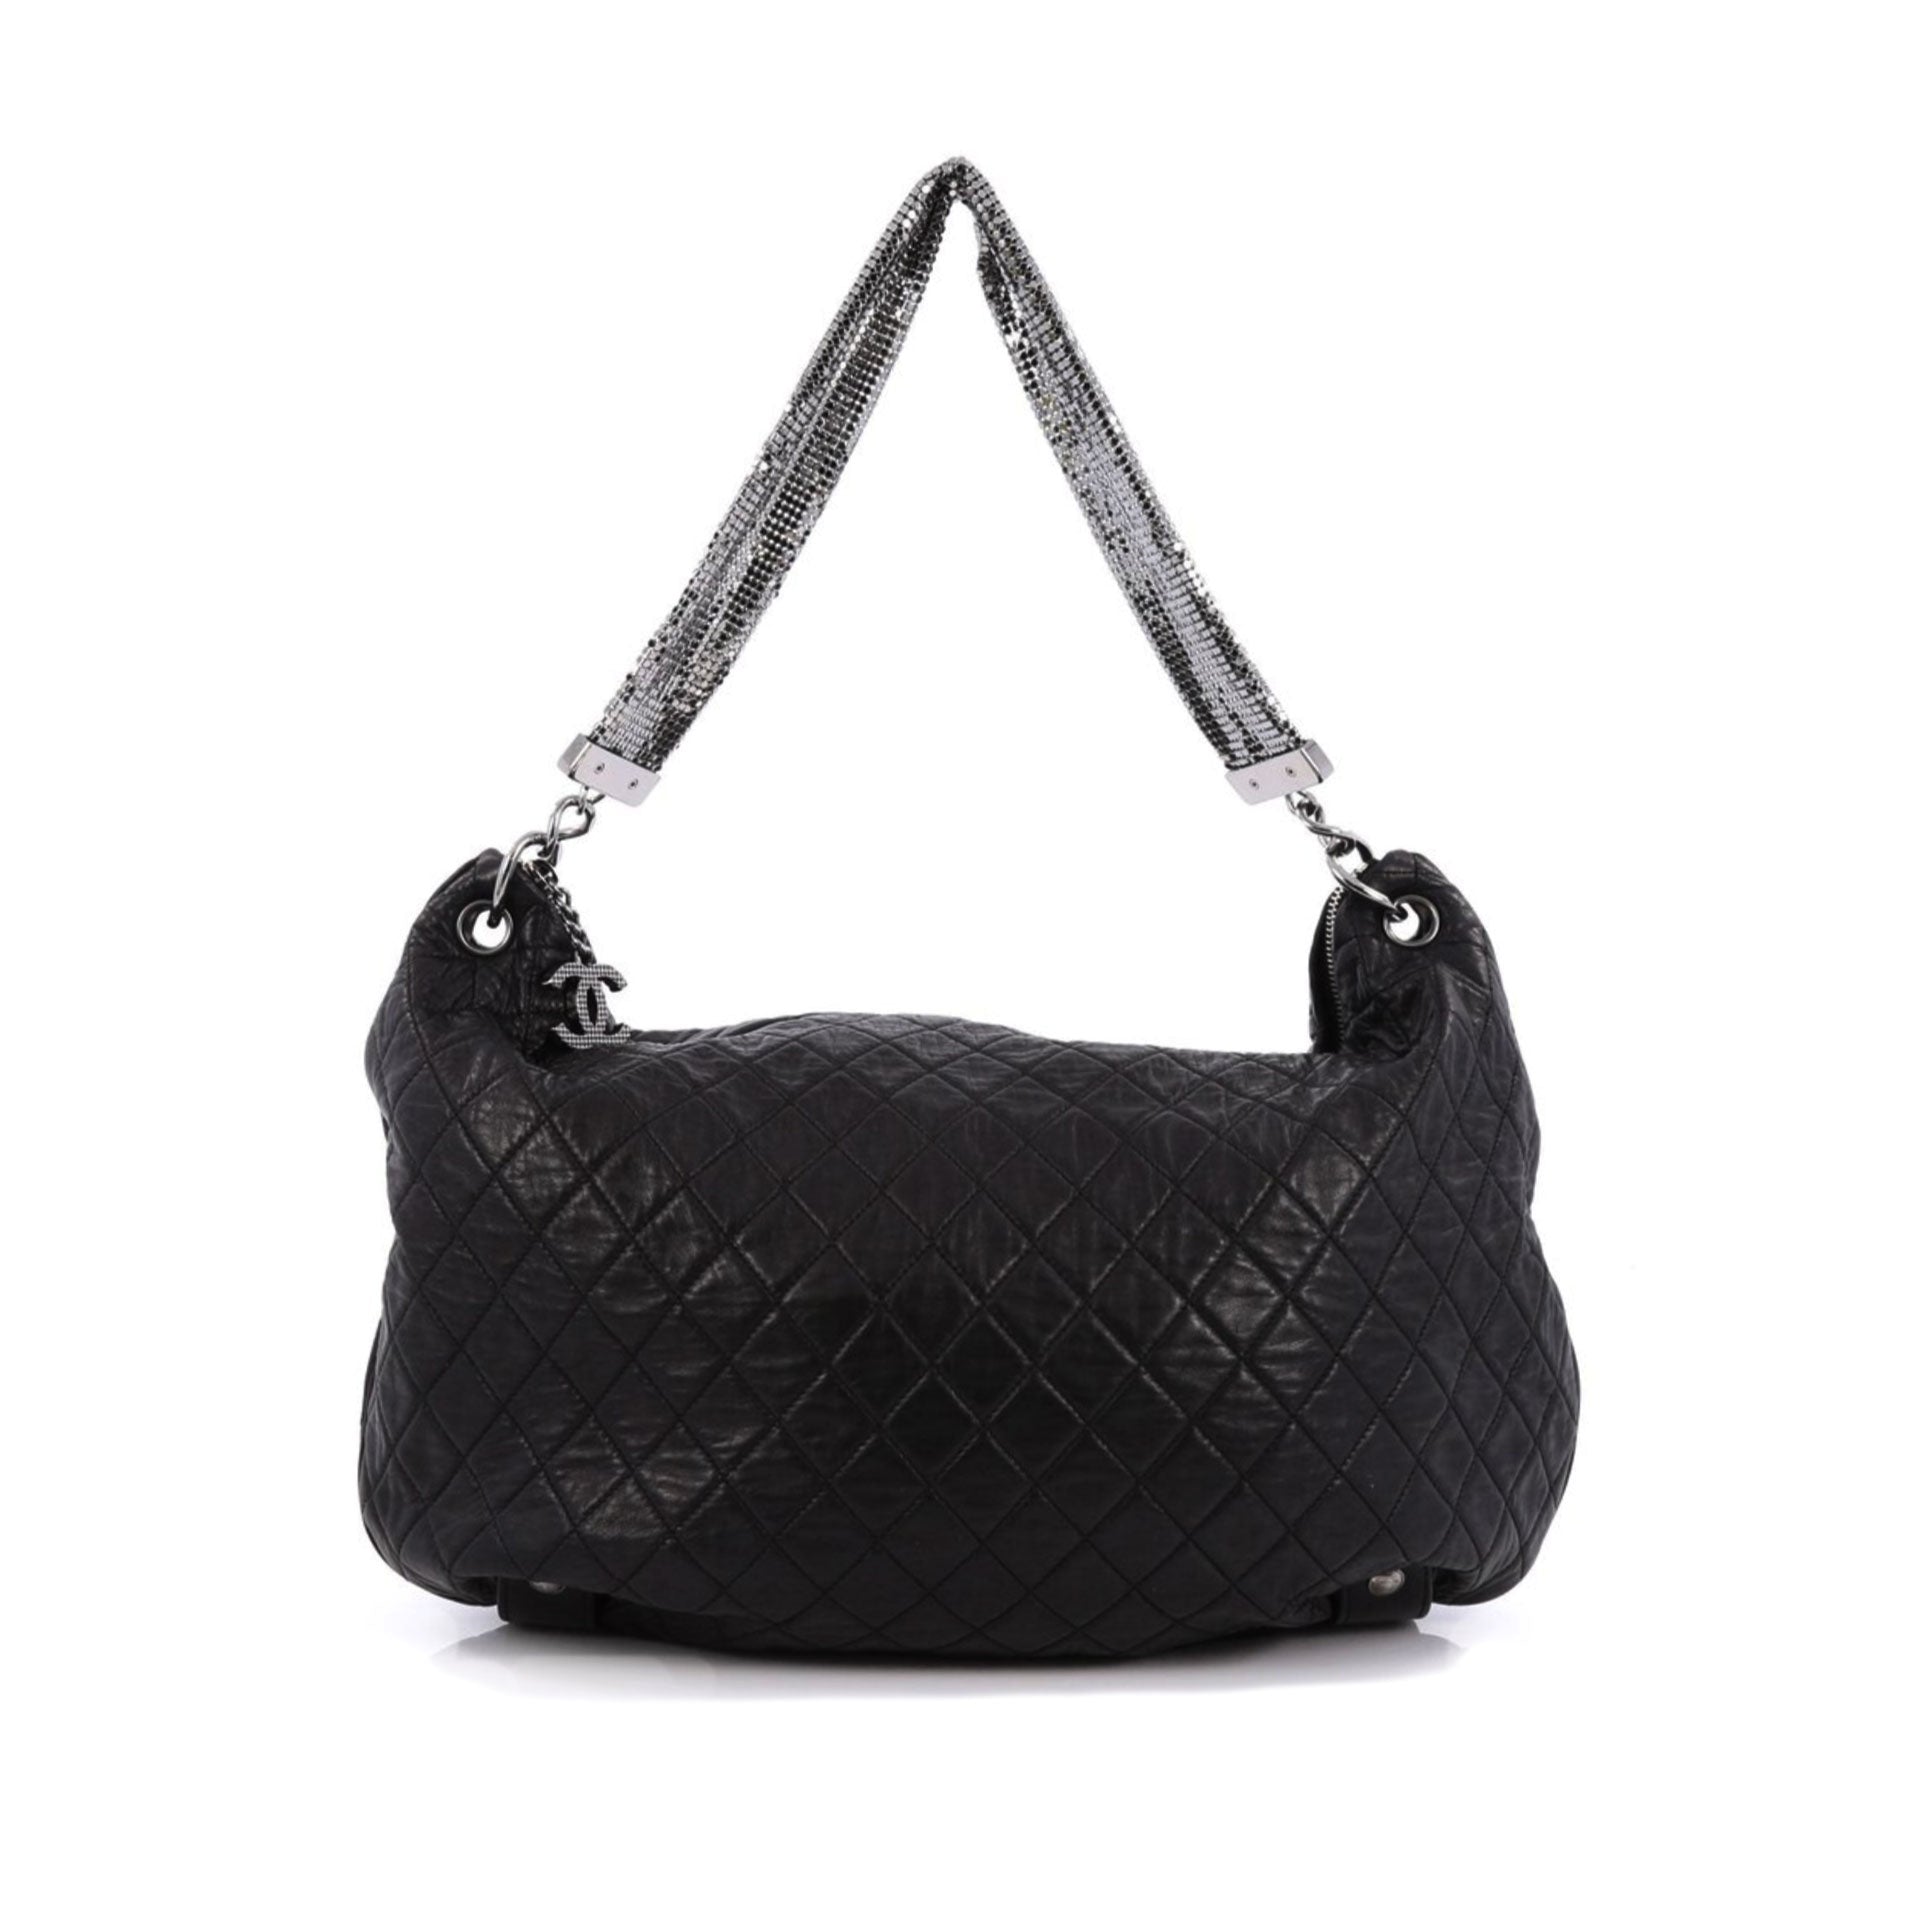 Chanel Limited Edition Jumbo Mesh Chain Lambskin Quilted Hobo Satchel